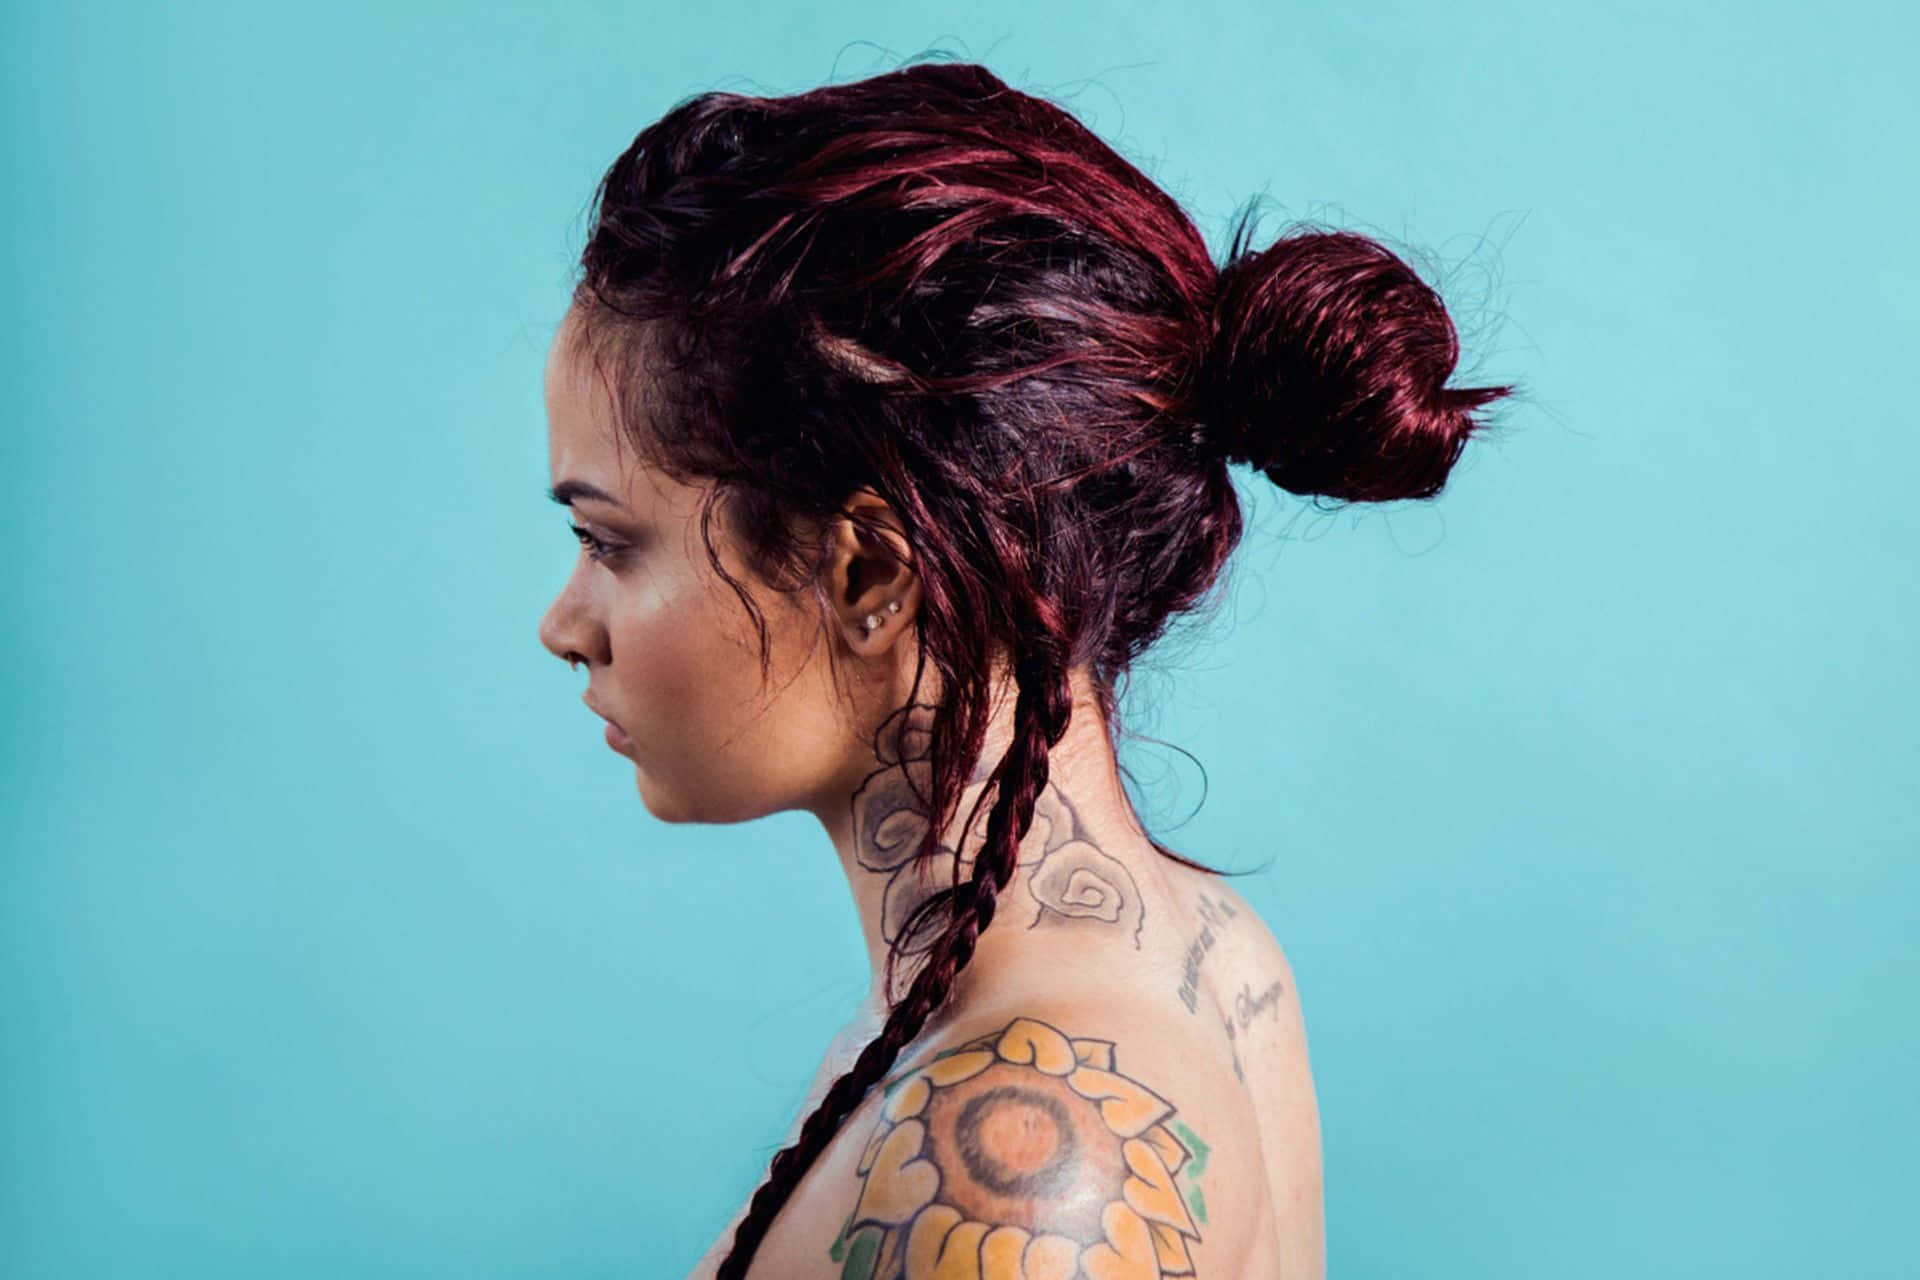 Kehlani Brings Her Vibrant Style To The Stage Background